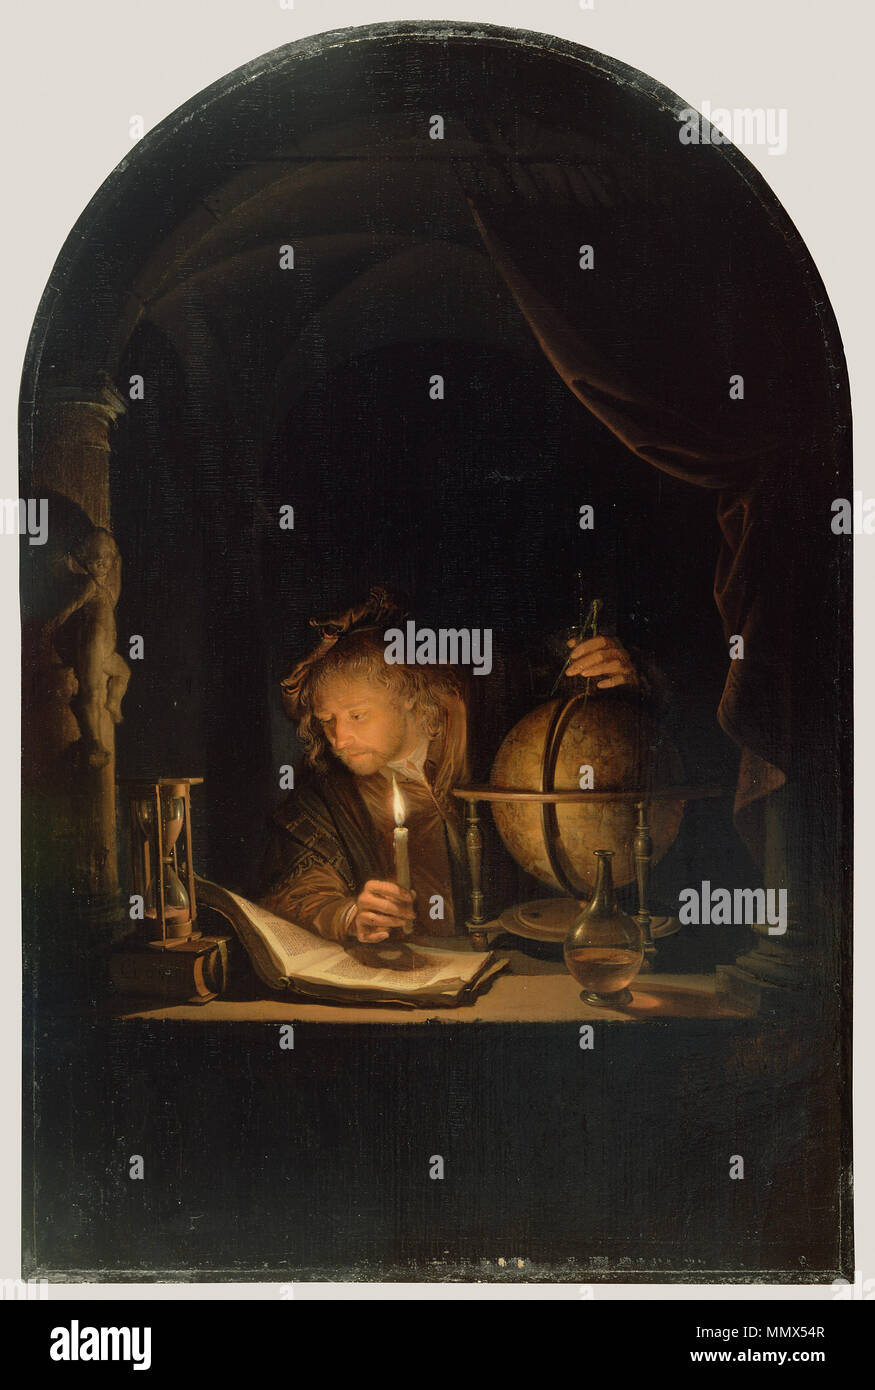 Astronomer by Candlelight; Gerrit Dou, Dutch, 1613 - 1675; late 1650s; Oil on panel; Unframed: 32 x 21.2 cm (12 5/8 x 8 3/8 in.), Framed: 45.9 x 34.4 x 5.4 cm (18 1/16 x 13 9/16 x 2 1/8 in.); 86.PB.732 Dou, Gerard - Astronomer by Candlelight - c. 1665 Stock Photo